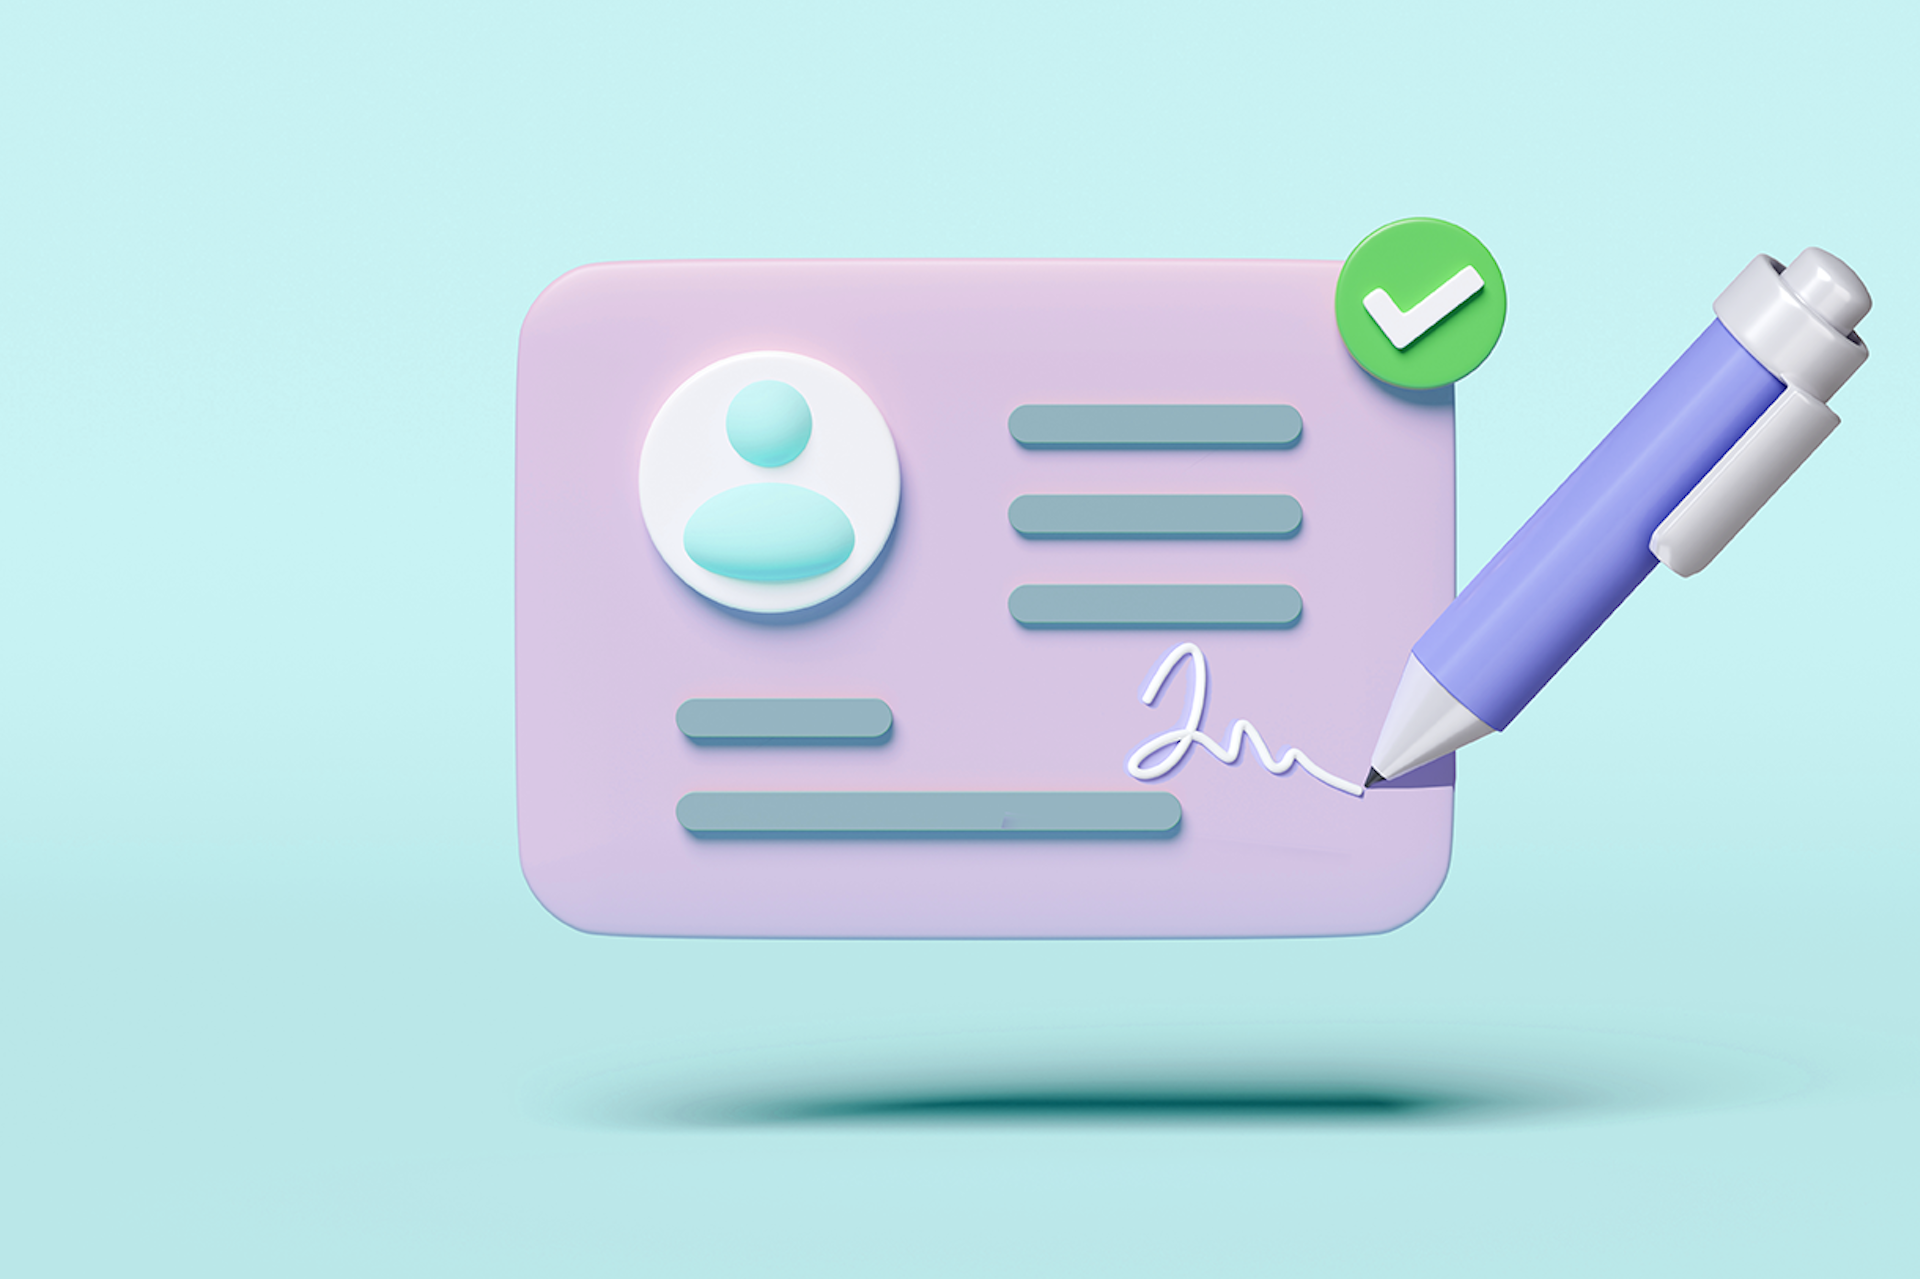 An illustration of a contact card with a profile picture and lines of a contract, with a pen signing a name and a green checkmark. Influencer marketing agreement blog post.